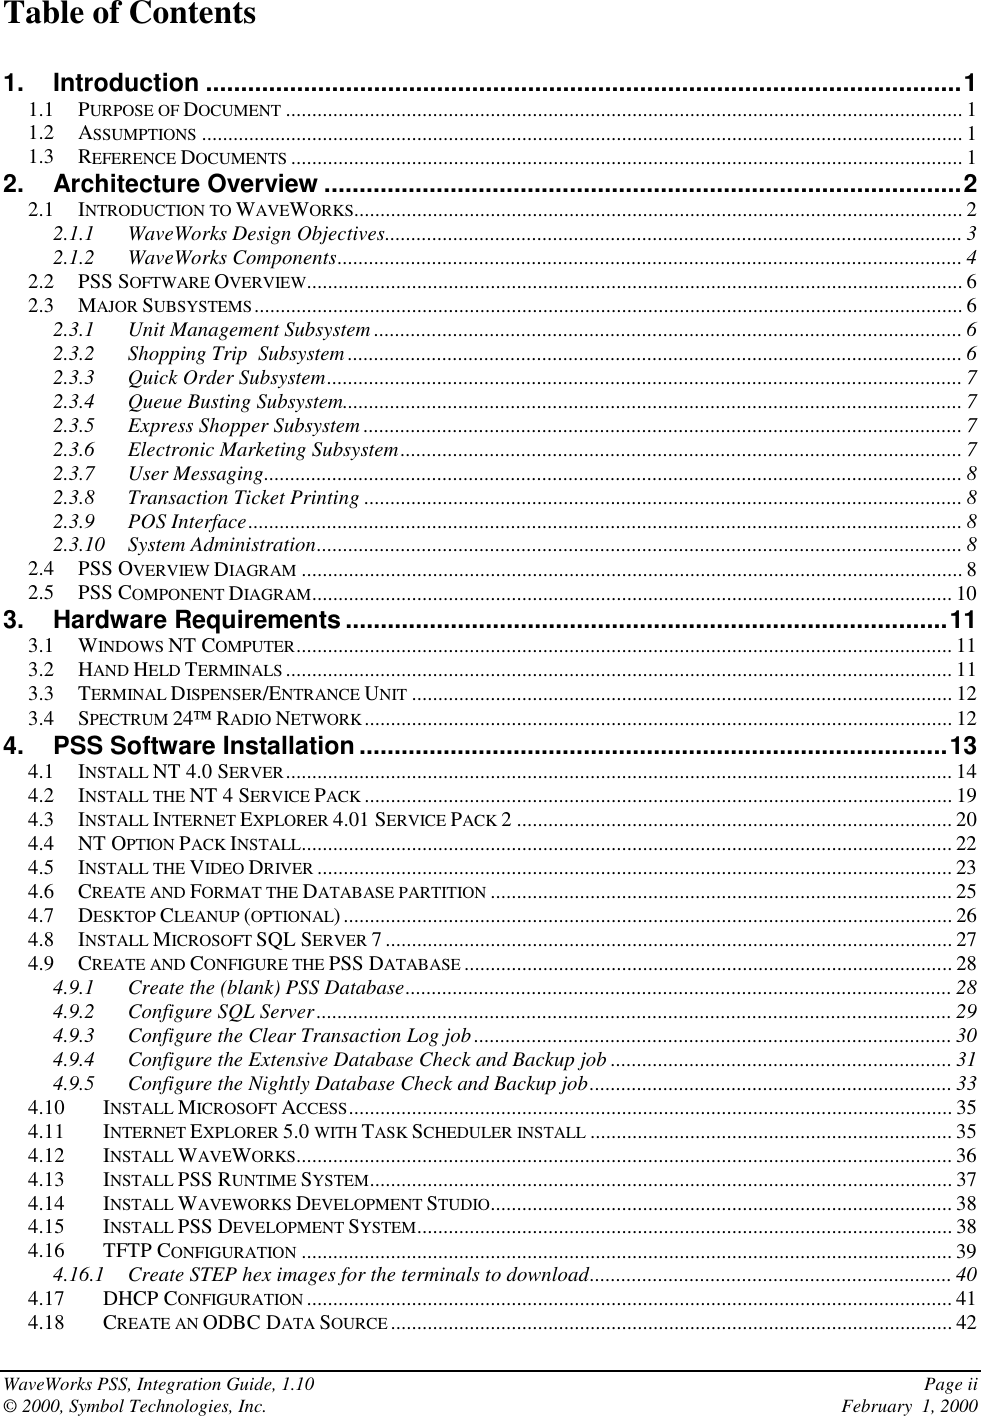 WaveWorks PSS, Integration Guide, 1.10 Page ii© 2000, Symbol Technologies, Inc. February  1, 2000Table of Contents1. Introduction ............................................................................................................11.1 PURPOSE OF DOCUMENT ................................................................................................................................. 11.2 ASSUMPTIONS ................................................................................................................................................. 11.3 REFERENCE DOCUMENTS ................................................................................................................................12. Architecture Overview ...........................................................................................22.1 INTRODUCTION TO WAVEWORKS.................................................................................................................... 22.1.1 WaveWorks Design Objectives.............................................................................................................. 32.1.2 WaveWorks Components....................................................................................................................... 42.2 PSS SOFTWARE OVERVIEW............................................................................................................................. 62.3 MAJOR SUBSYSTEMS....................................................................................................................................... 62.3.1 Unit Management Subsystem ................................................................................................................ 62.3.2 Shopping Trip  Subsystem ..................................................................................................................... 62.3.3 Quick Order Subsystem......................................................................................................................... 72.3.4 Queue Busting Subsystem...................................................................................................................... 72.3.5 Express Shopper Subsystem .................................................................................................................. 72.3.6 Electronic Marketing Subsystem........................................................................................................... 72.3.7 User Messaging..................................................................................................................................... 82.3.8 Transaction Ticket Printing .................................................................................................................. 82.3.9 POS Interface........................................................................................................................................ 82.3.10 System Administration........................................................................................................................... 82.4 PSS OVERVIEW DIAGRAM .............................................................................................................................. 82.5 PSS COMPONENT DIAGRAM.......................................................................................................................... 103. Hardware Requirements ......................................................................................113.1 WINDOWS NT COMPUTER............................................................................................................................. 113.2 HAND HELD TERMINALS ............................................................................................................................... 113.3 TERMINAL DISPENSER/ENTRANCE UNIT ....................................................................................................... 123.4 SPECTRUM 24 RADIO NETWORK................................................................................................................ 124. PSS Software Installation....................................................................................134.1 INSTALL NT 4.0 SERVER............................................................................................................................... 144.2 INSTALL THE NT 4 SERVICE PACK ................................................................................................................ 194.3 INSTALL INTERNET EXPLORER 4.01 SERVICE PACK 2 ................................................................................... 204.4 NT OPTION PACK INSTALL............................................................................................................................ 224.5 INSTALL THE VIDEO DRIVER ......................................................................................................................... 234.6 CREATE AND FORMAT THE DATABASE PARTITION ........................................................................................ 254.7 DESKTOP CLEANUP (OPTIONAL) .................................................................................................................... 264.8 INSTALL MICROSOFT SQL SERVER 7 ............................................................................................................ 274.9 CREATE AND CONFIGURE THE PSS DATABASE ............................................................................................. 284.9.1 Create the (blank) PSS Database........................................................................................................ 284.9.2 Configure SQL Server......................................................................................................................... 294.9.3 Configure the Clear Transaction Log job........................................................................................... 304.9.4 Configure the Extensive Database Check and Backup job ................................................................. 314.9.5 Configure the Nightly Database Check and Backup job..................................................................... 334.10 INSTALL MICROSOFT ACCESS................................................................................................................... 354.11 INTERNET EXPLORER 5.0 WITH TASK SCHEDULER INSTALL ..................................................................... 354.12 INSTALL WAVEWORKS............................................................................................................................. 364.13 INSTALL PSS RUNTIME SYSTEM............................................................................................................... 374.14 INSTALL WAVEWORKS DEVELOPMENT STUDIO........................................................................................ 384.15 INSTALL PSS DEVELOPMENT SYSTEM...................................................................................................... 384.16 TFTP CONFIGURATION ............................................................................................................................ 394.16.1 Create STEP hex images for the terminals to download..................................................................... 404.17 DHCP CONFIGURATION ........................................................................................................................... 414.18 CREATE AN ODBC DATA SOURCE ........................................................................................................... 42